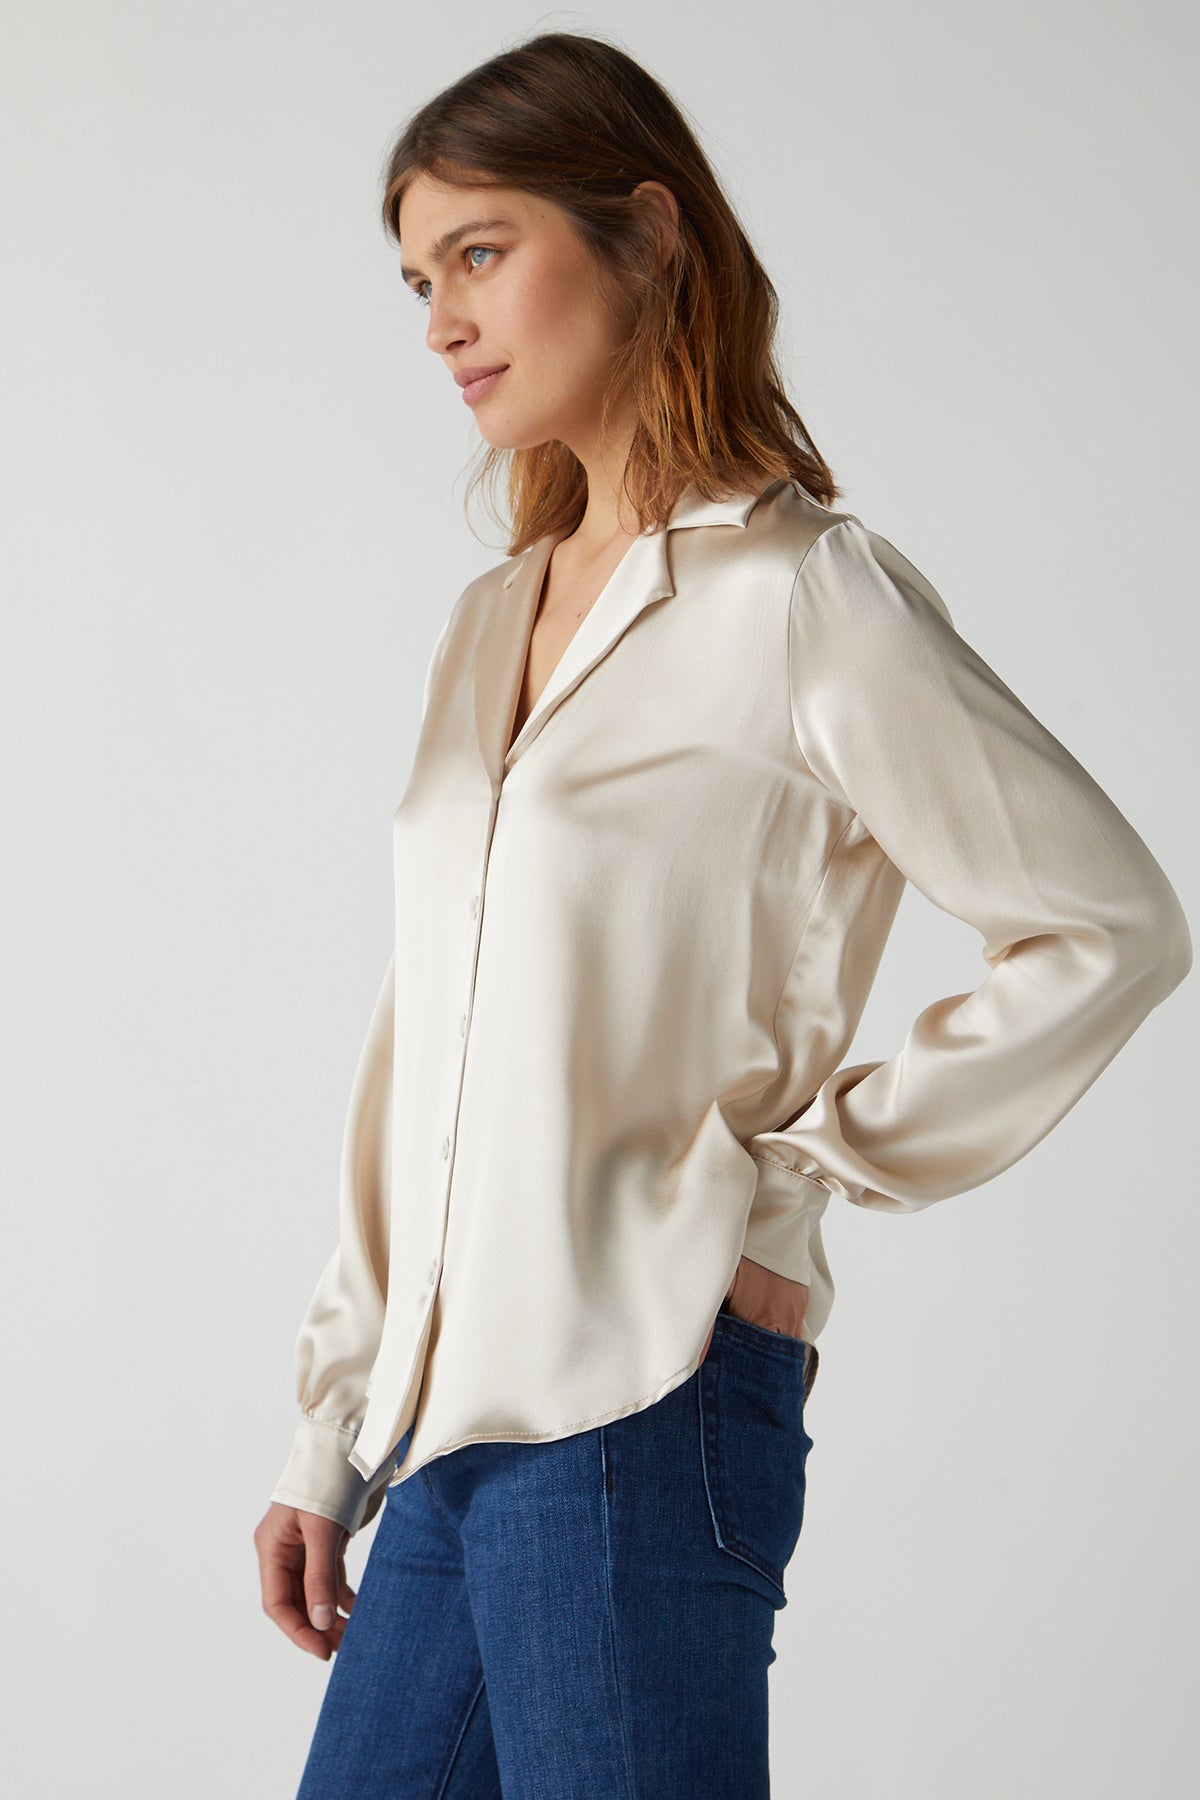 Soho Top in oyster side-25483383963841